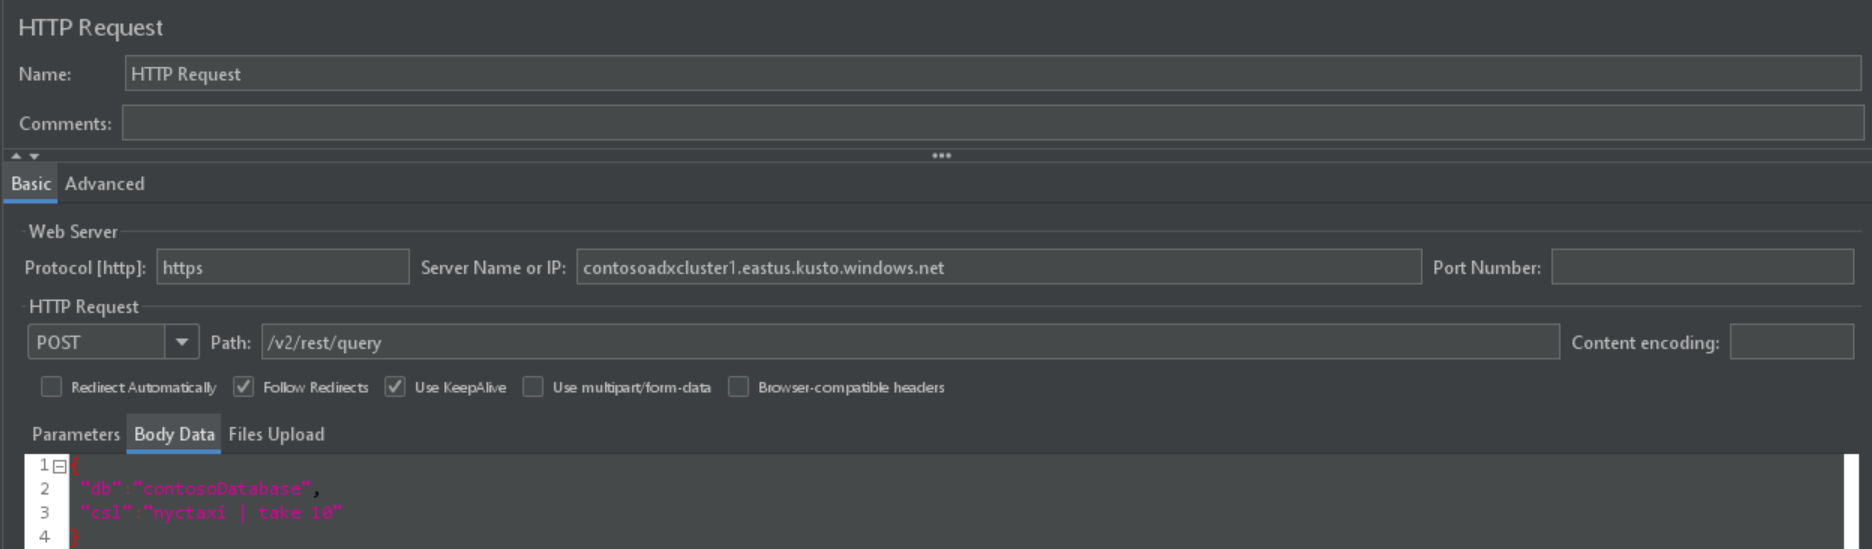 Screenshot of POST request, showing the body properties and the parameters of the API request.